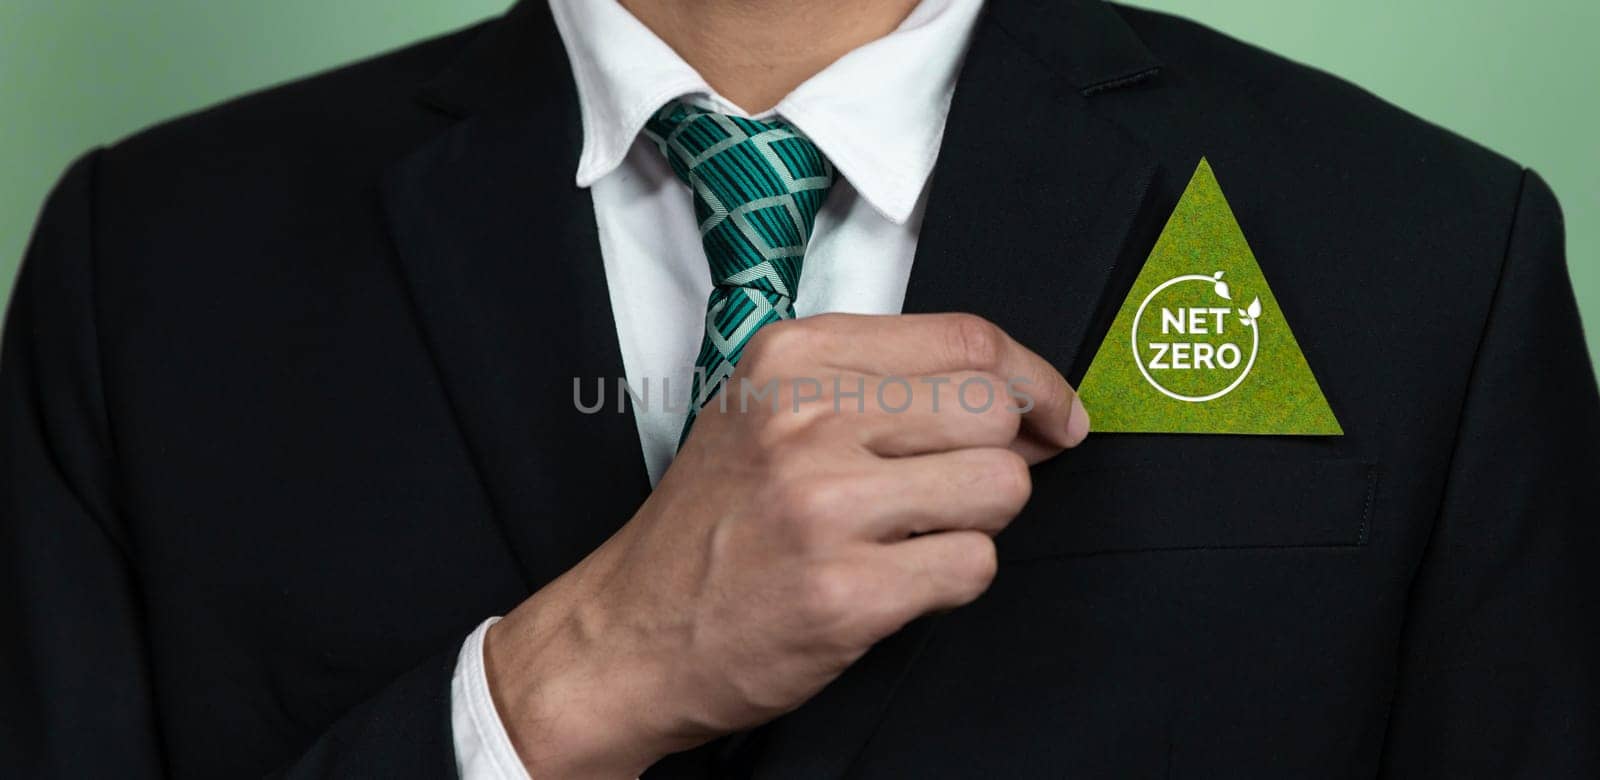 Corporate promoting sustainable and green business concept with businessman hold carbon neutral Net Zero symbol. Environmental protection effort using clean energy, zero CO2 pollution emission. Alter